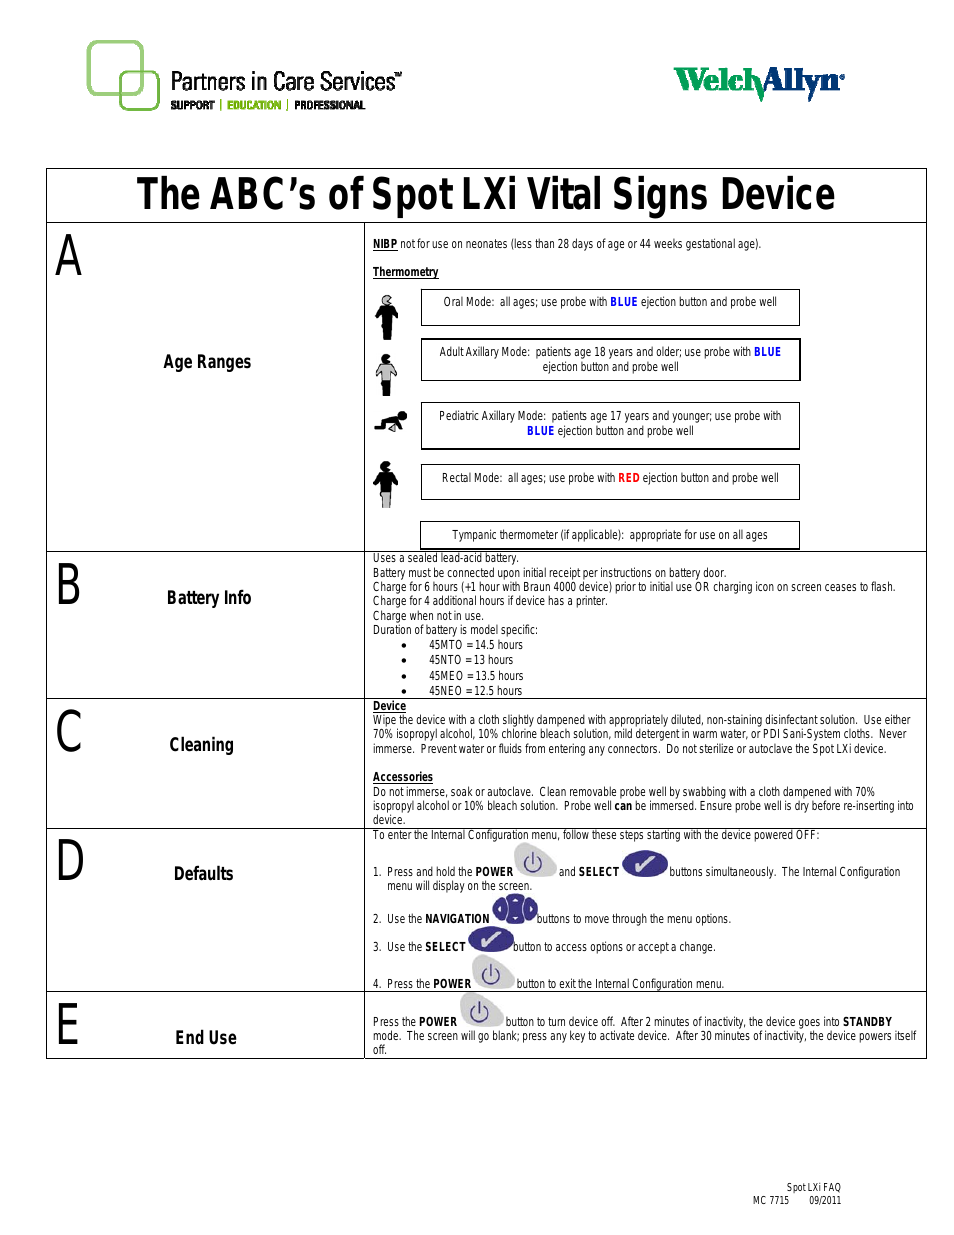 ABCs of Spot LXI Vital Signs Device - Quick Reference Guide